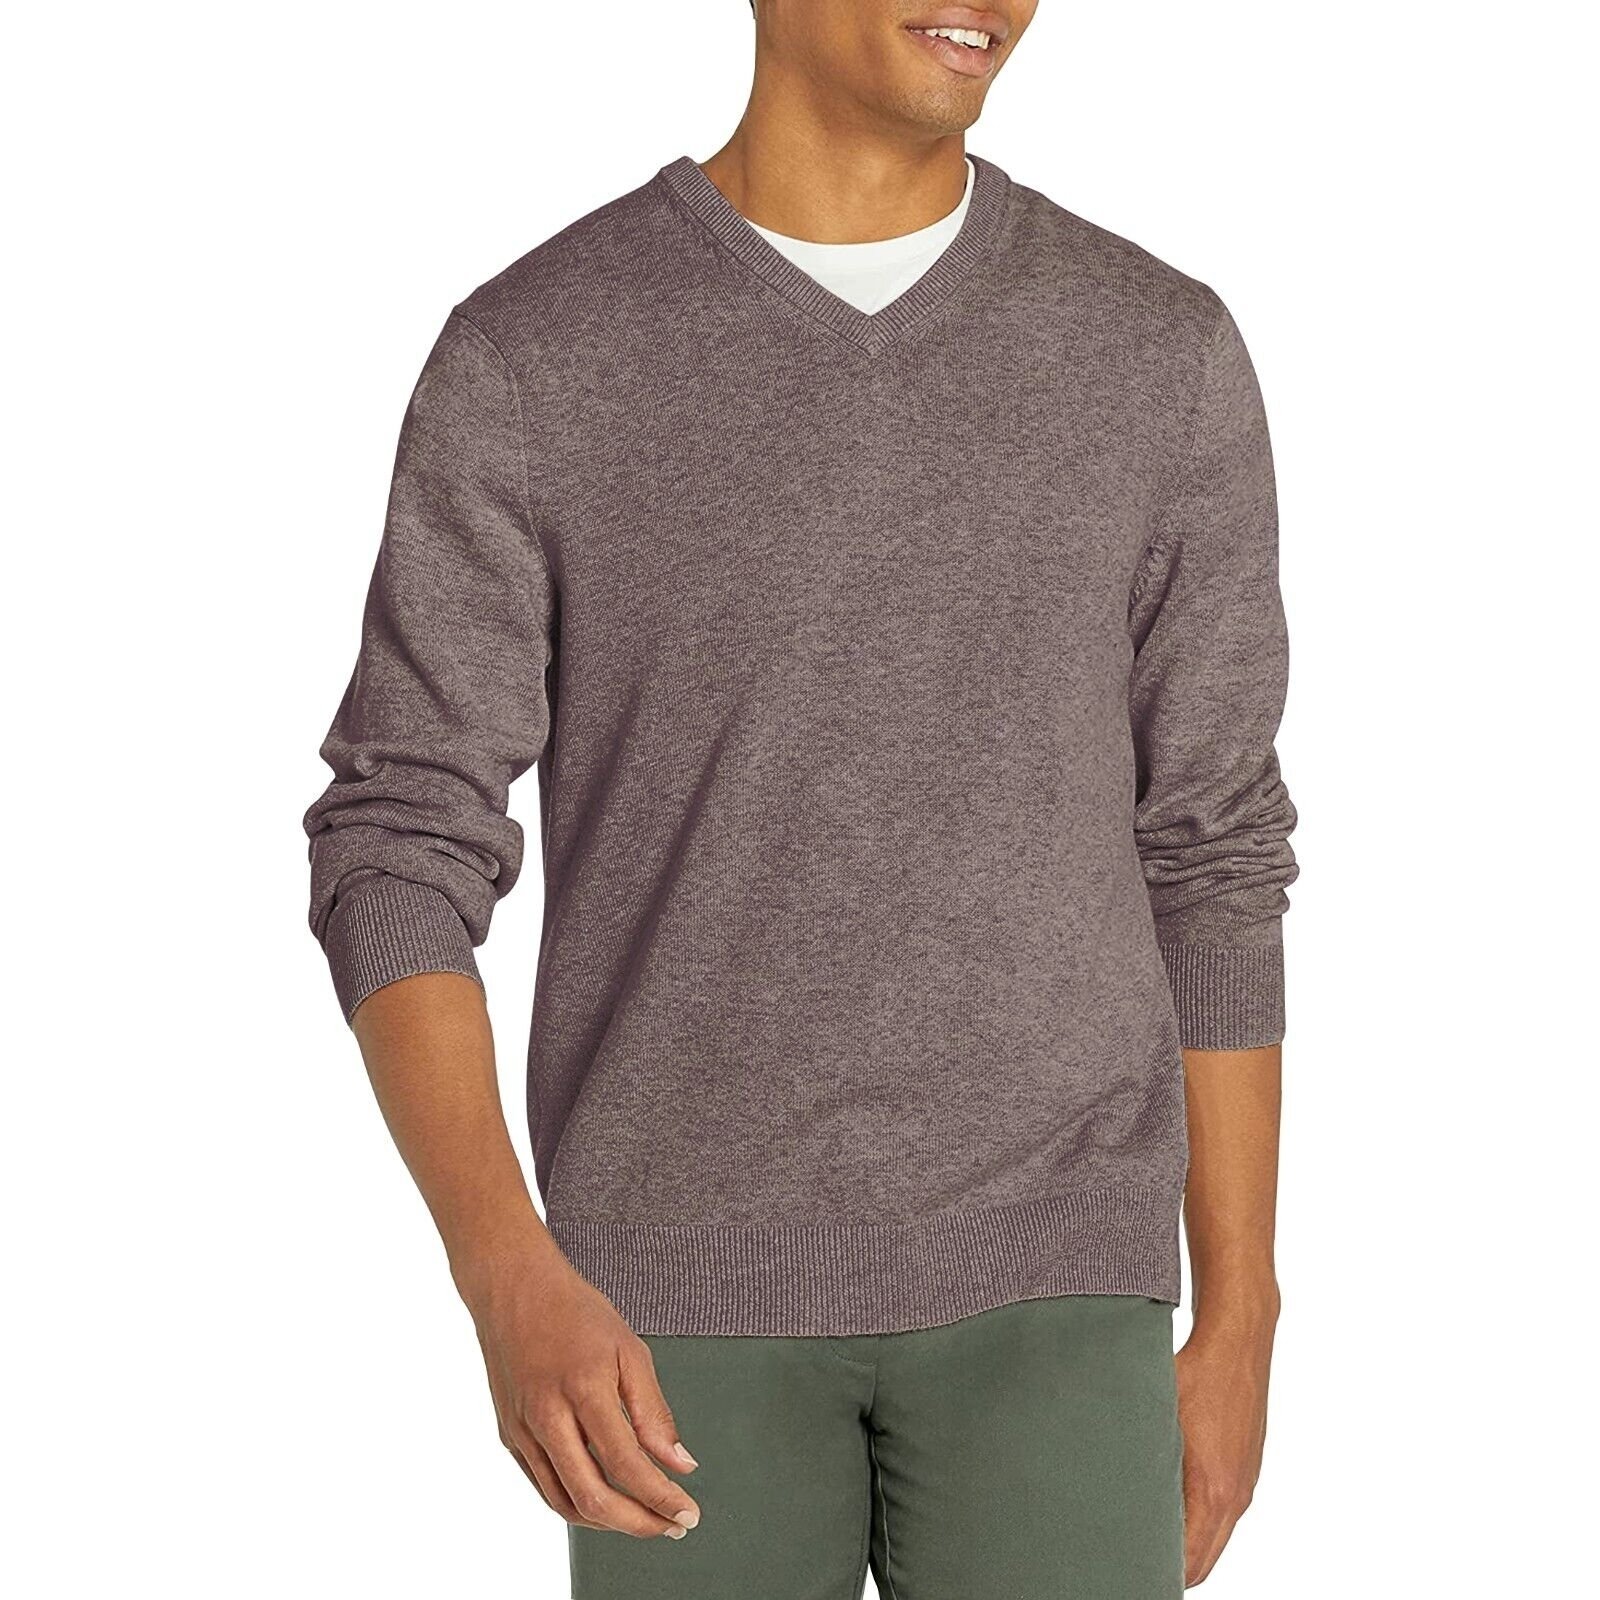 Men's Casual Ultra-Soft Slim Fit Warm Knit Pullover V-Neck Sweater For Winter - Brown, Small